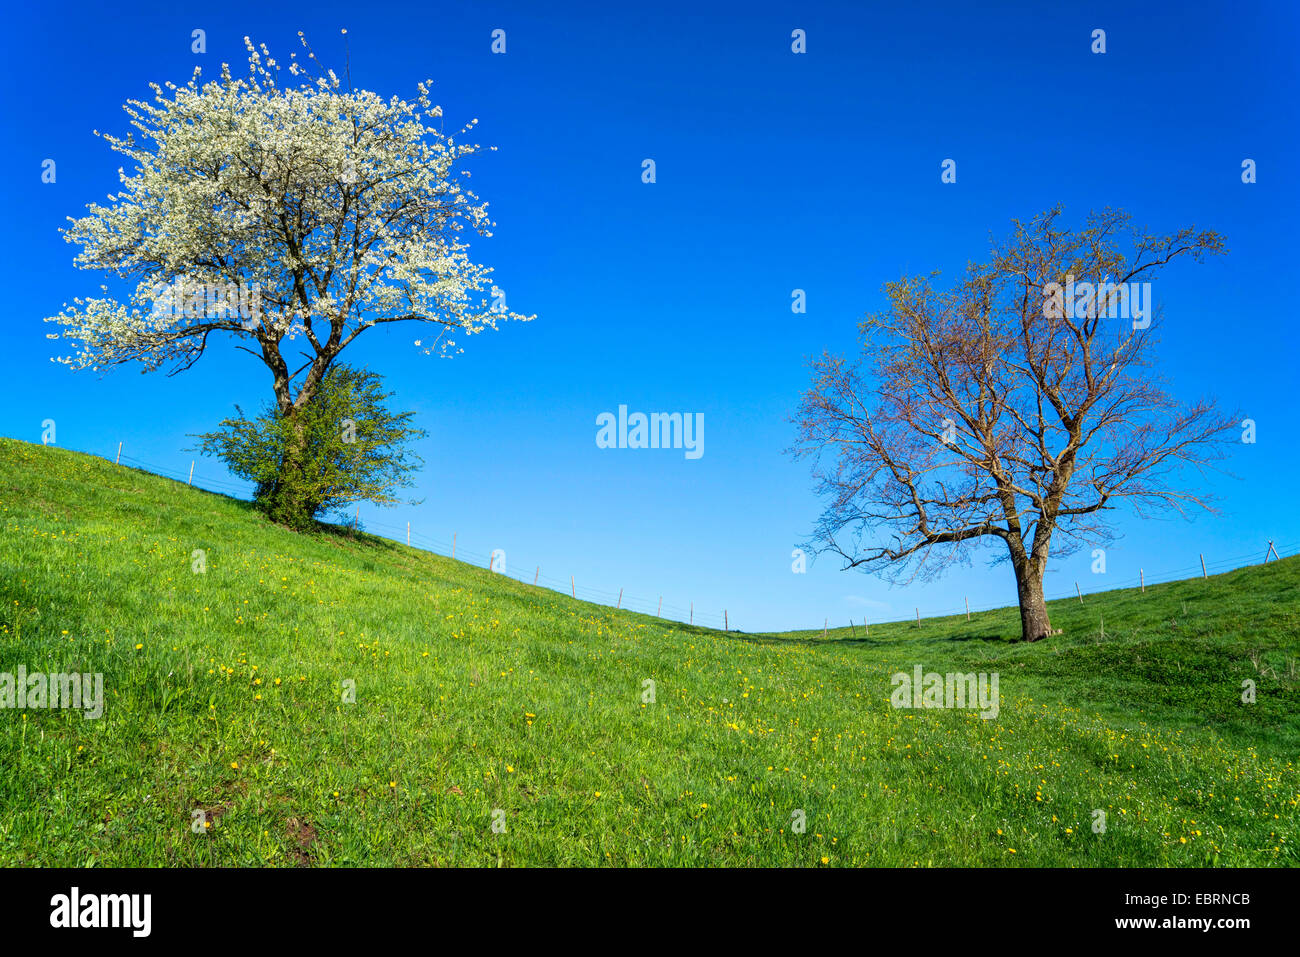 Wild cherry, Sweet cherry, gean, mazzard (Prunus avium), two trees on a hill in spring, the left one is a bloomimg wild cherry, Germany, Bavaria, Oberbayern, Upper Bavaria Stock Photo